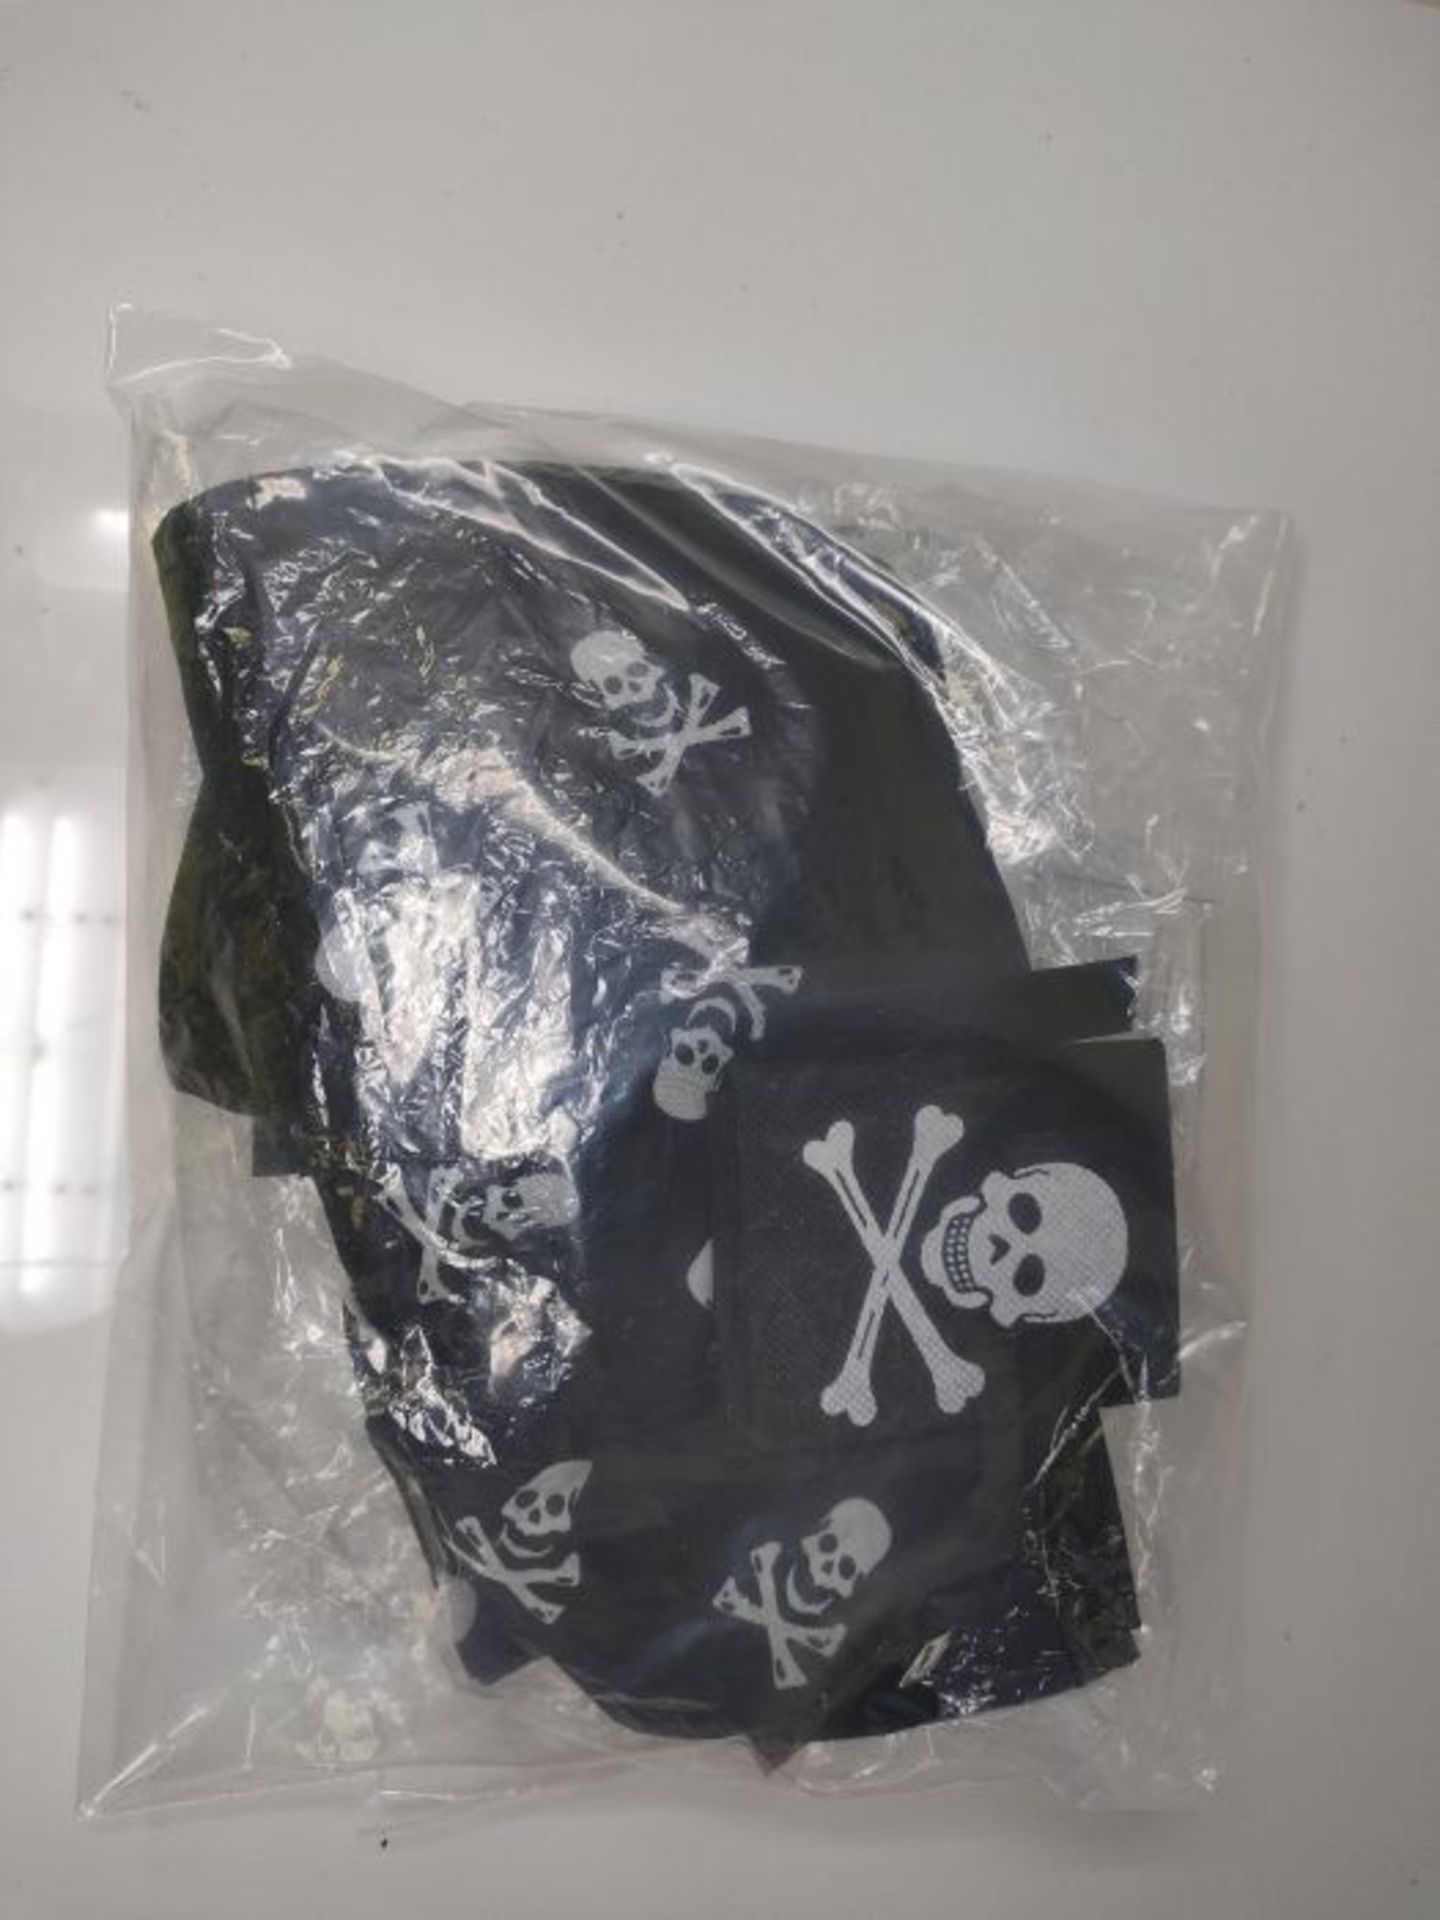 BESTZY 12 Pack Pirate Bandana Black Pirate Captain's Headscarf for Pirate Theme Party, - Image 2 of 2